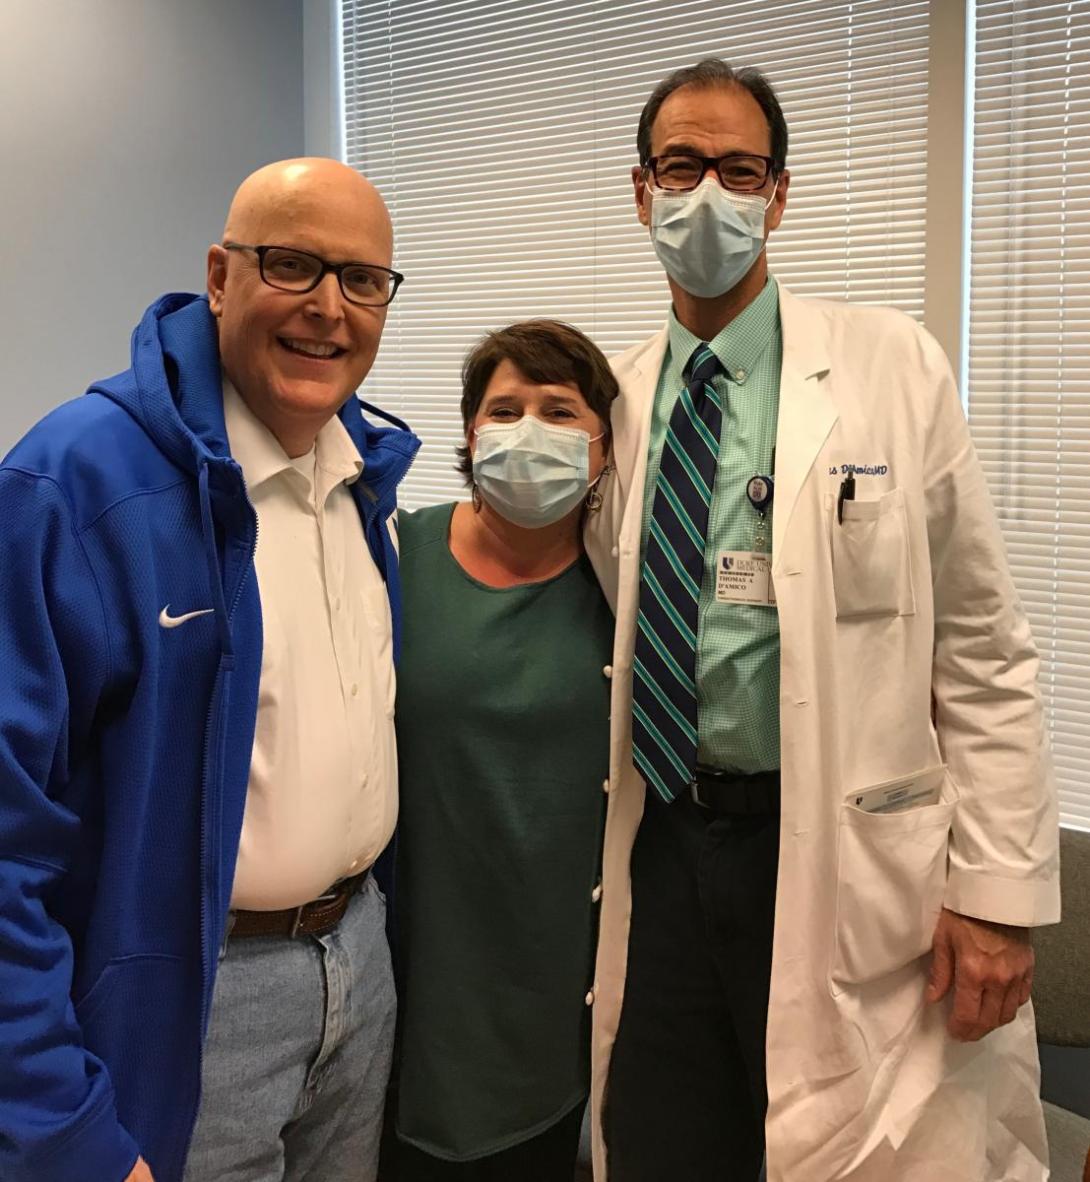 Scott Balderson standing with his wife and Thomas D’Amico in hospital